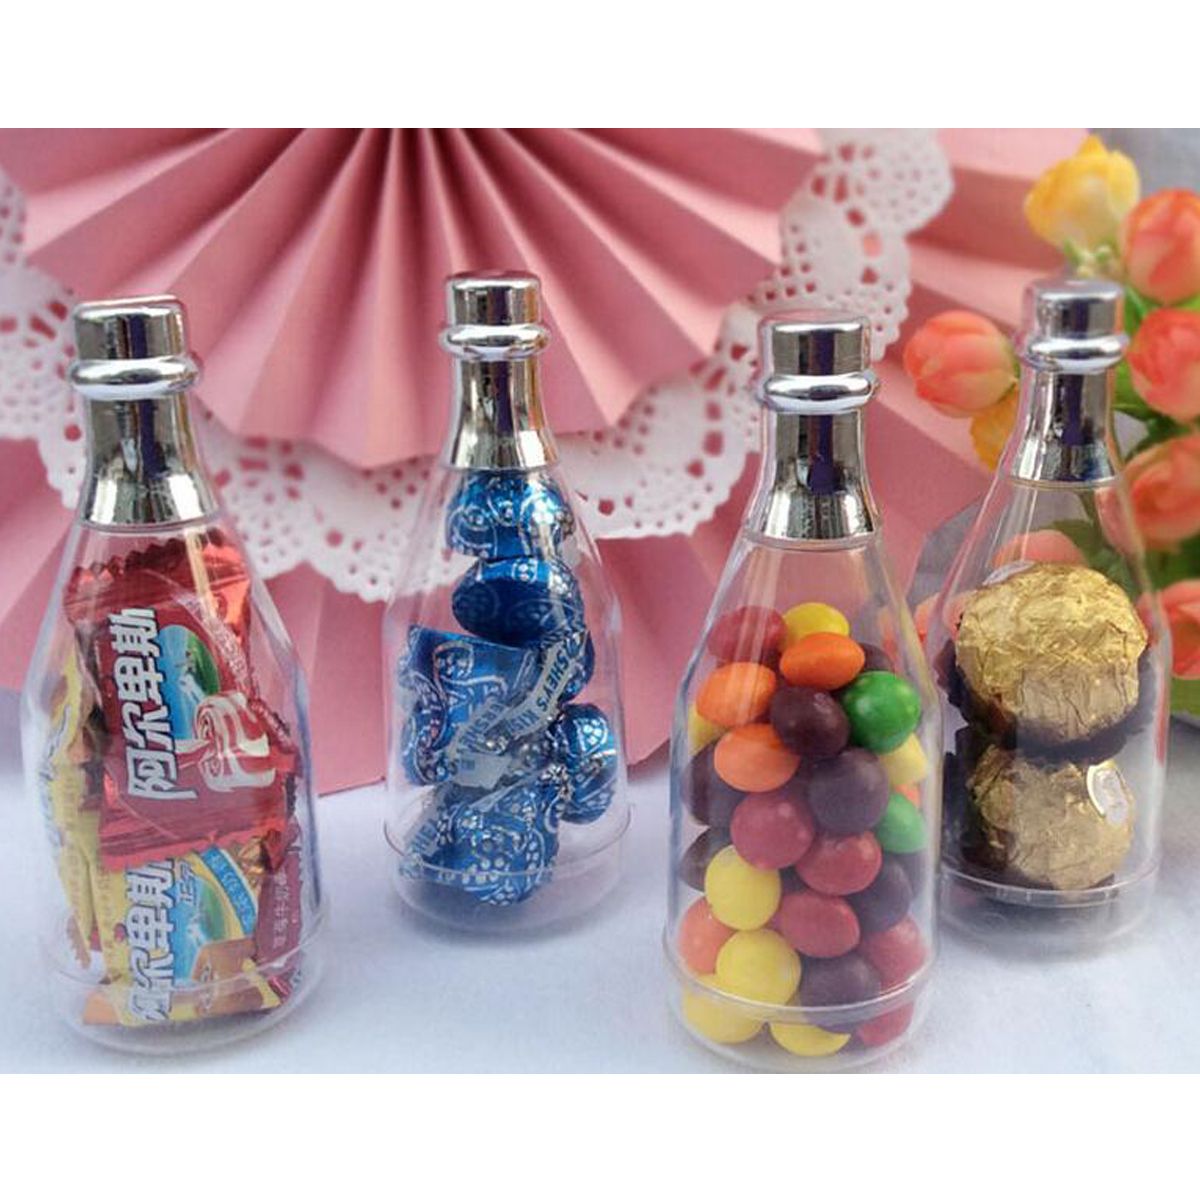 12-Clear-Fillable-Cham-pagne-Bottles-Candy-Boxes-Wedding-Party-Shower-Favors-1473323